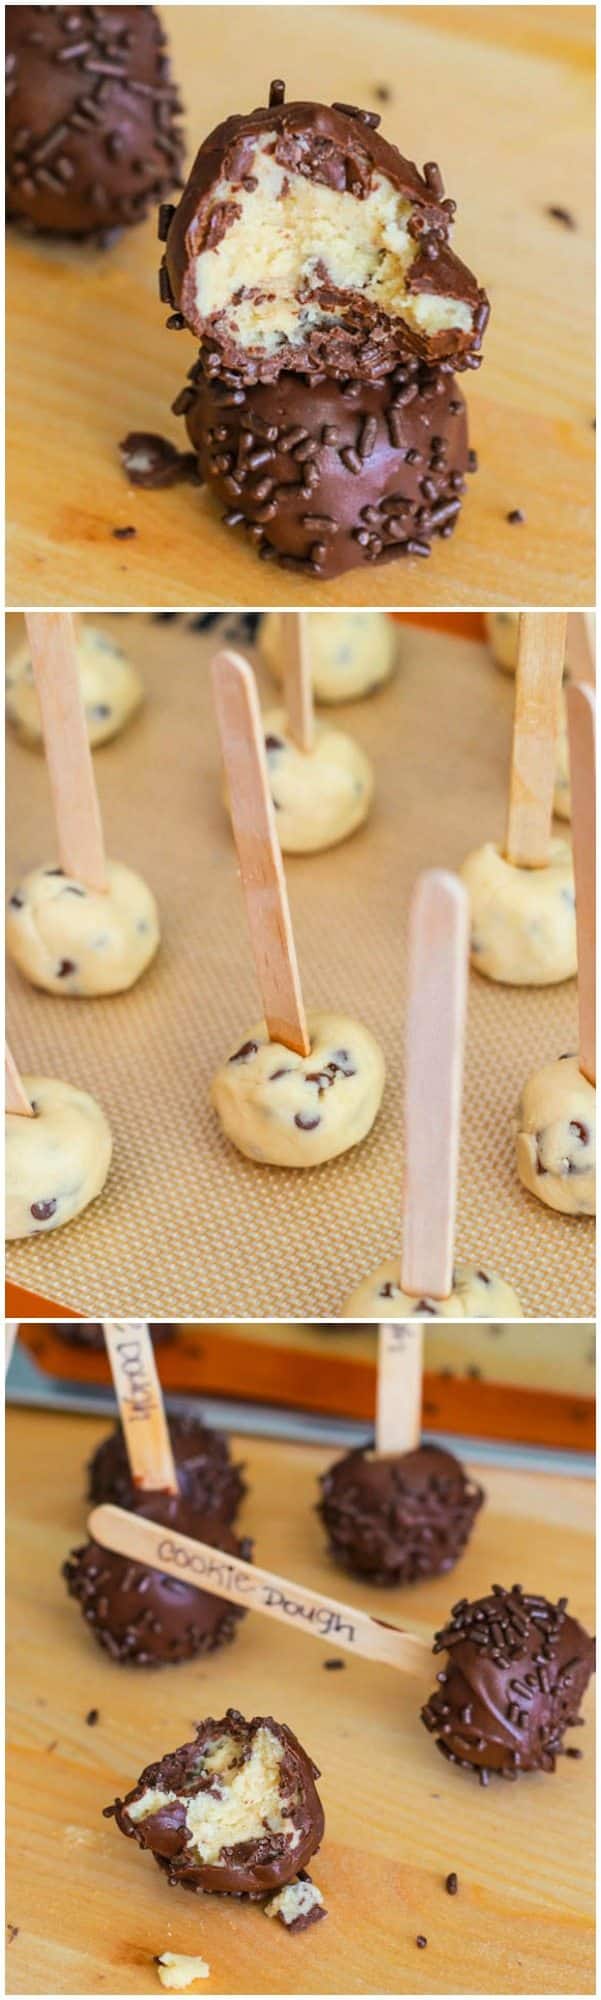 3 images of cookie dough covered in chocolate and sprinkles on a popsicle stick